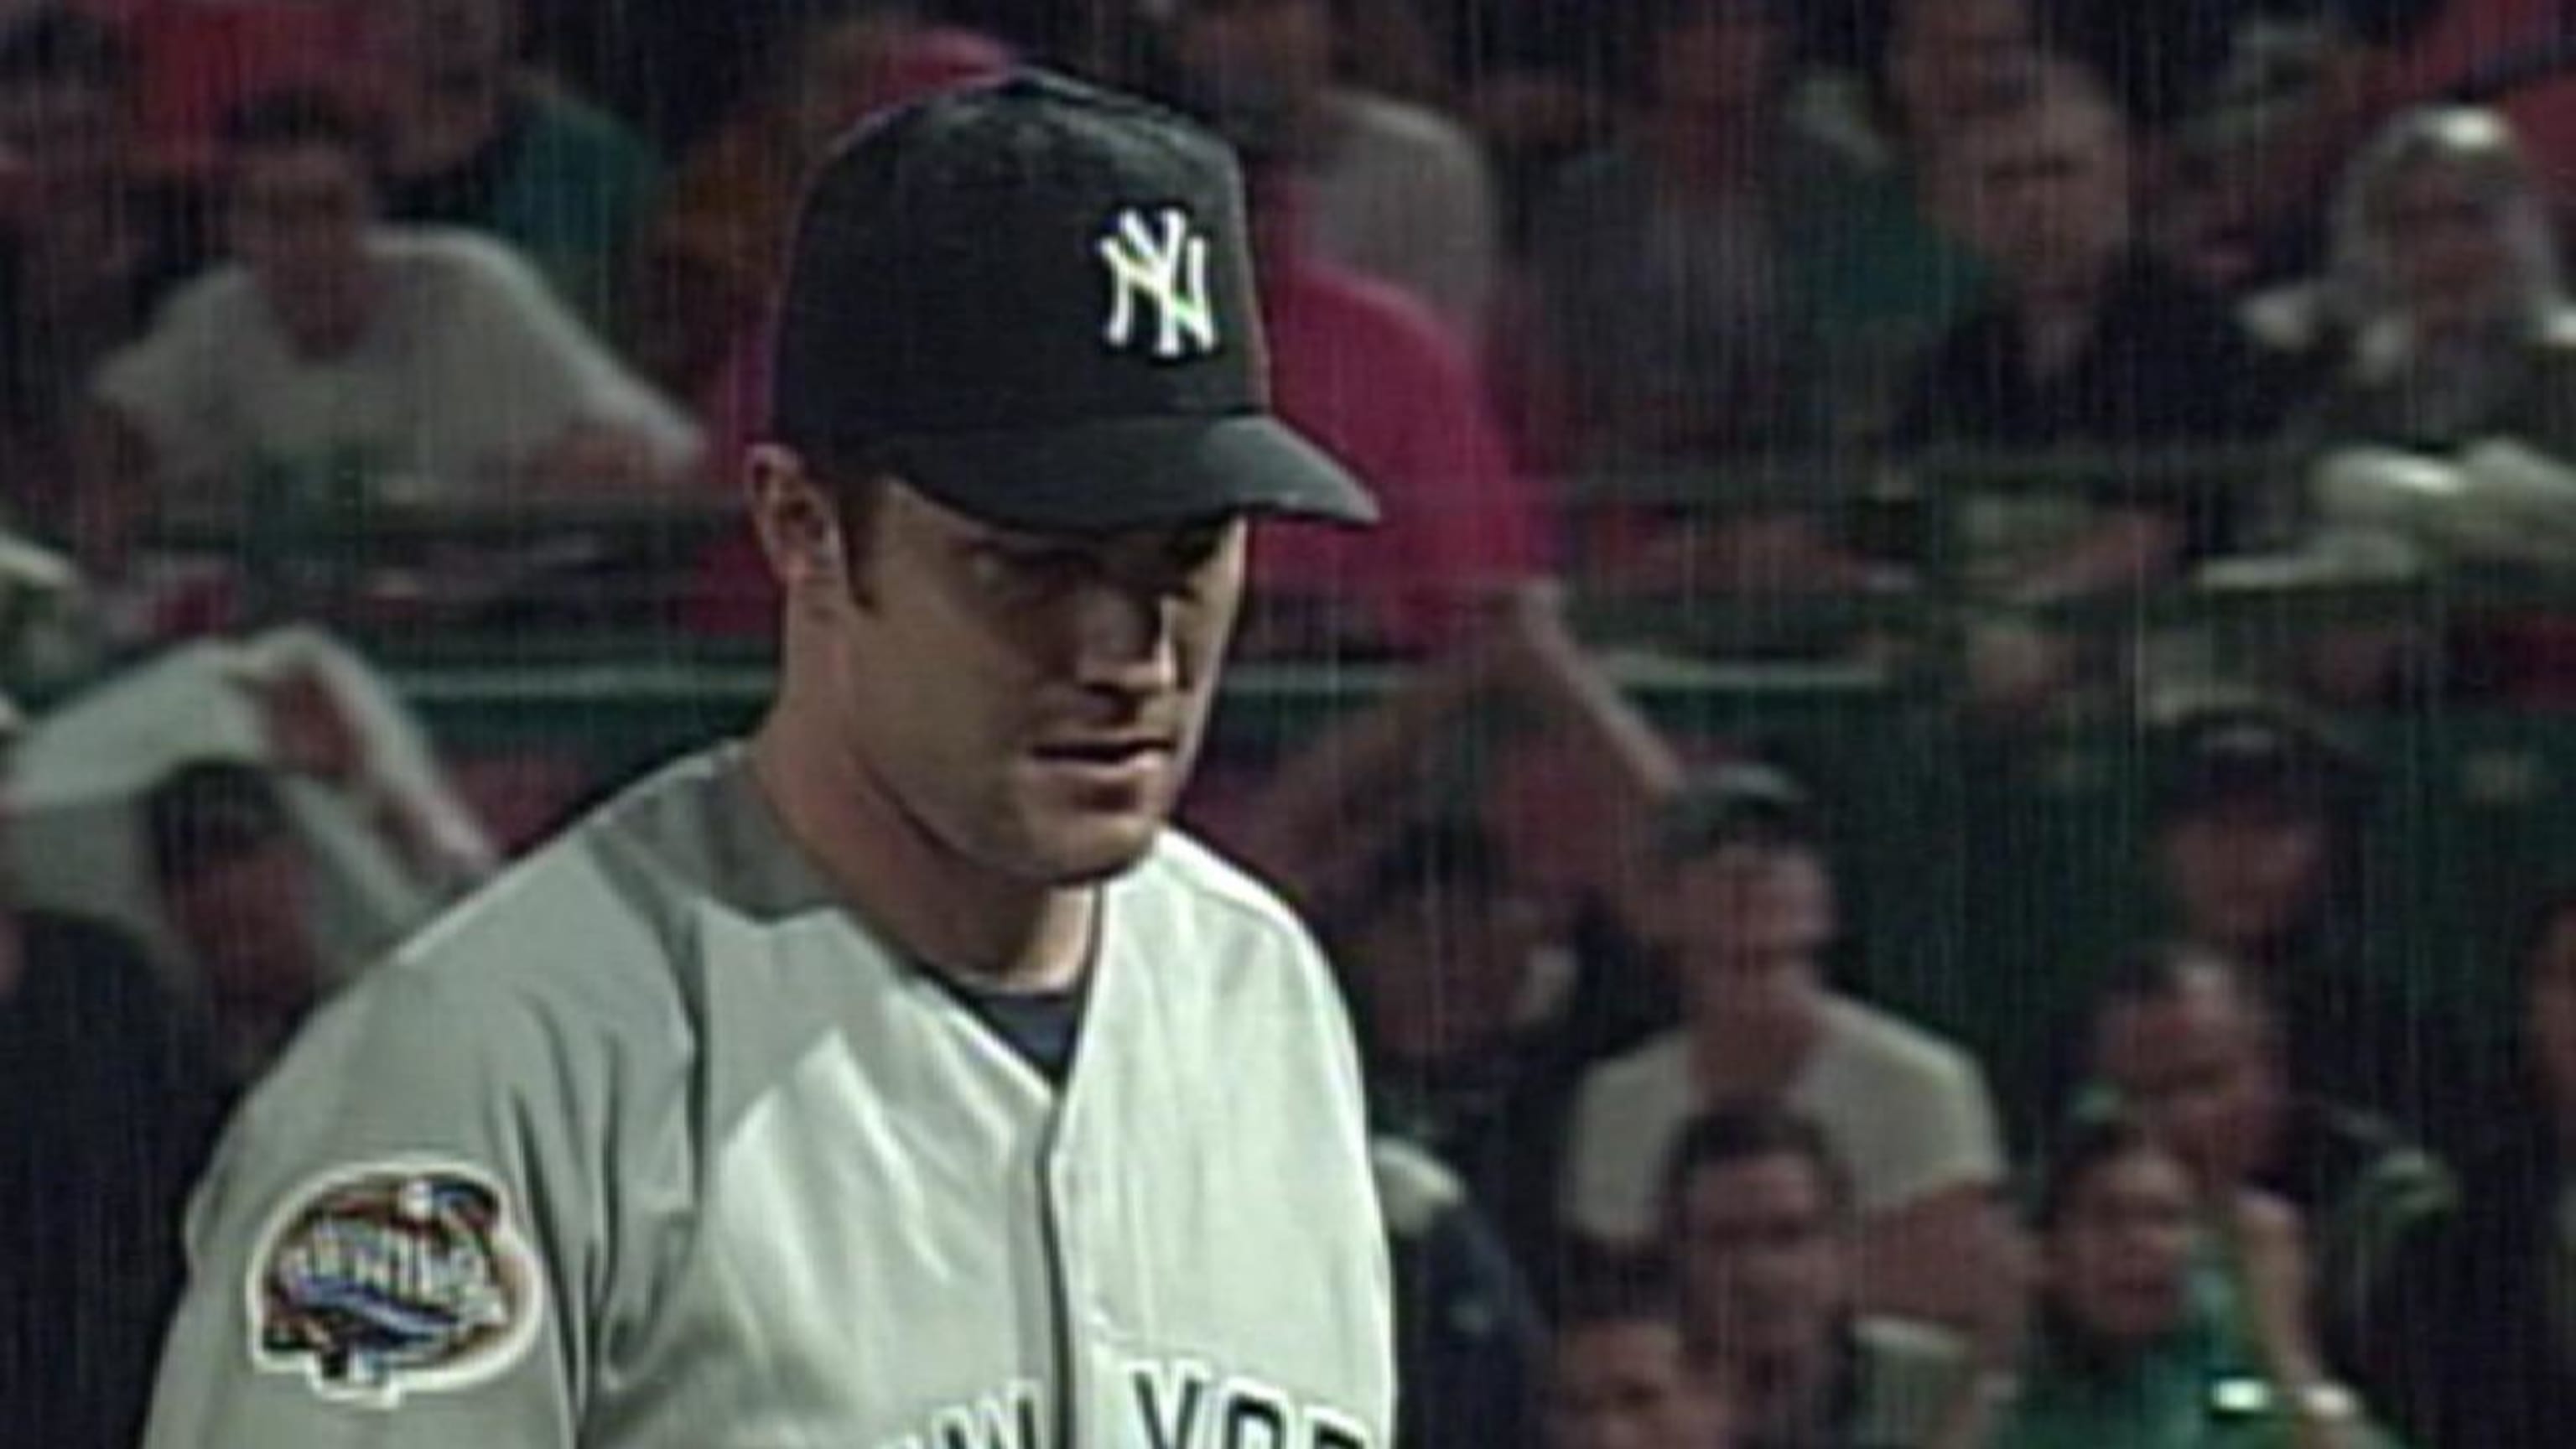 Mike Mussina's top moments